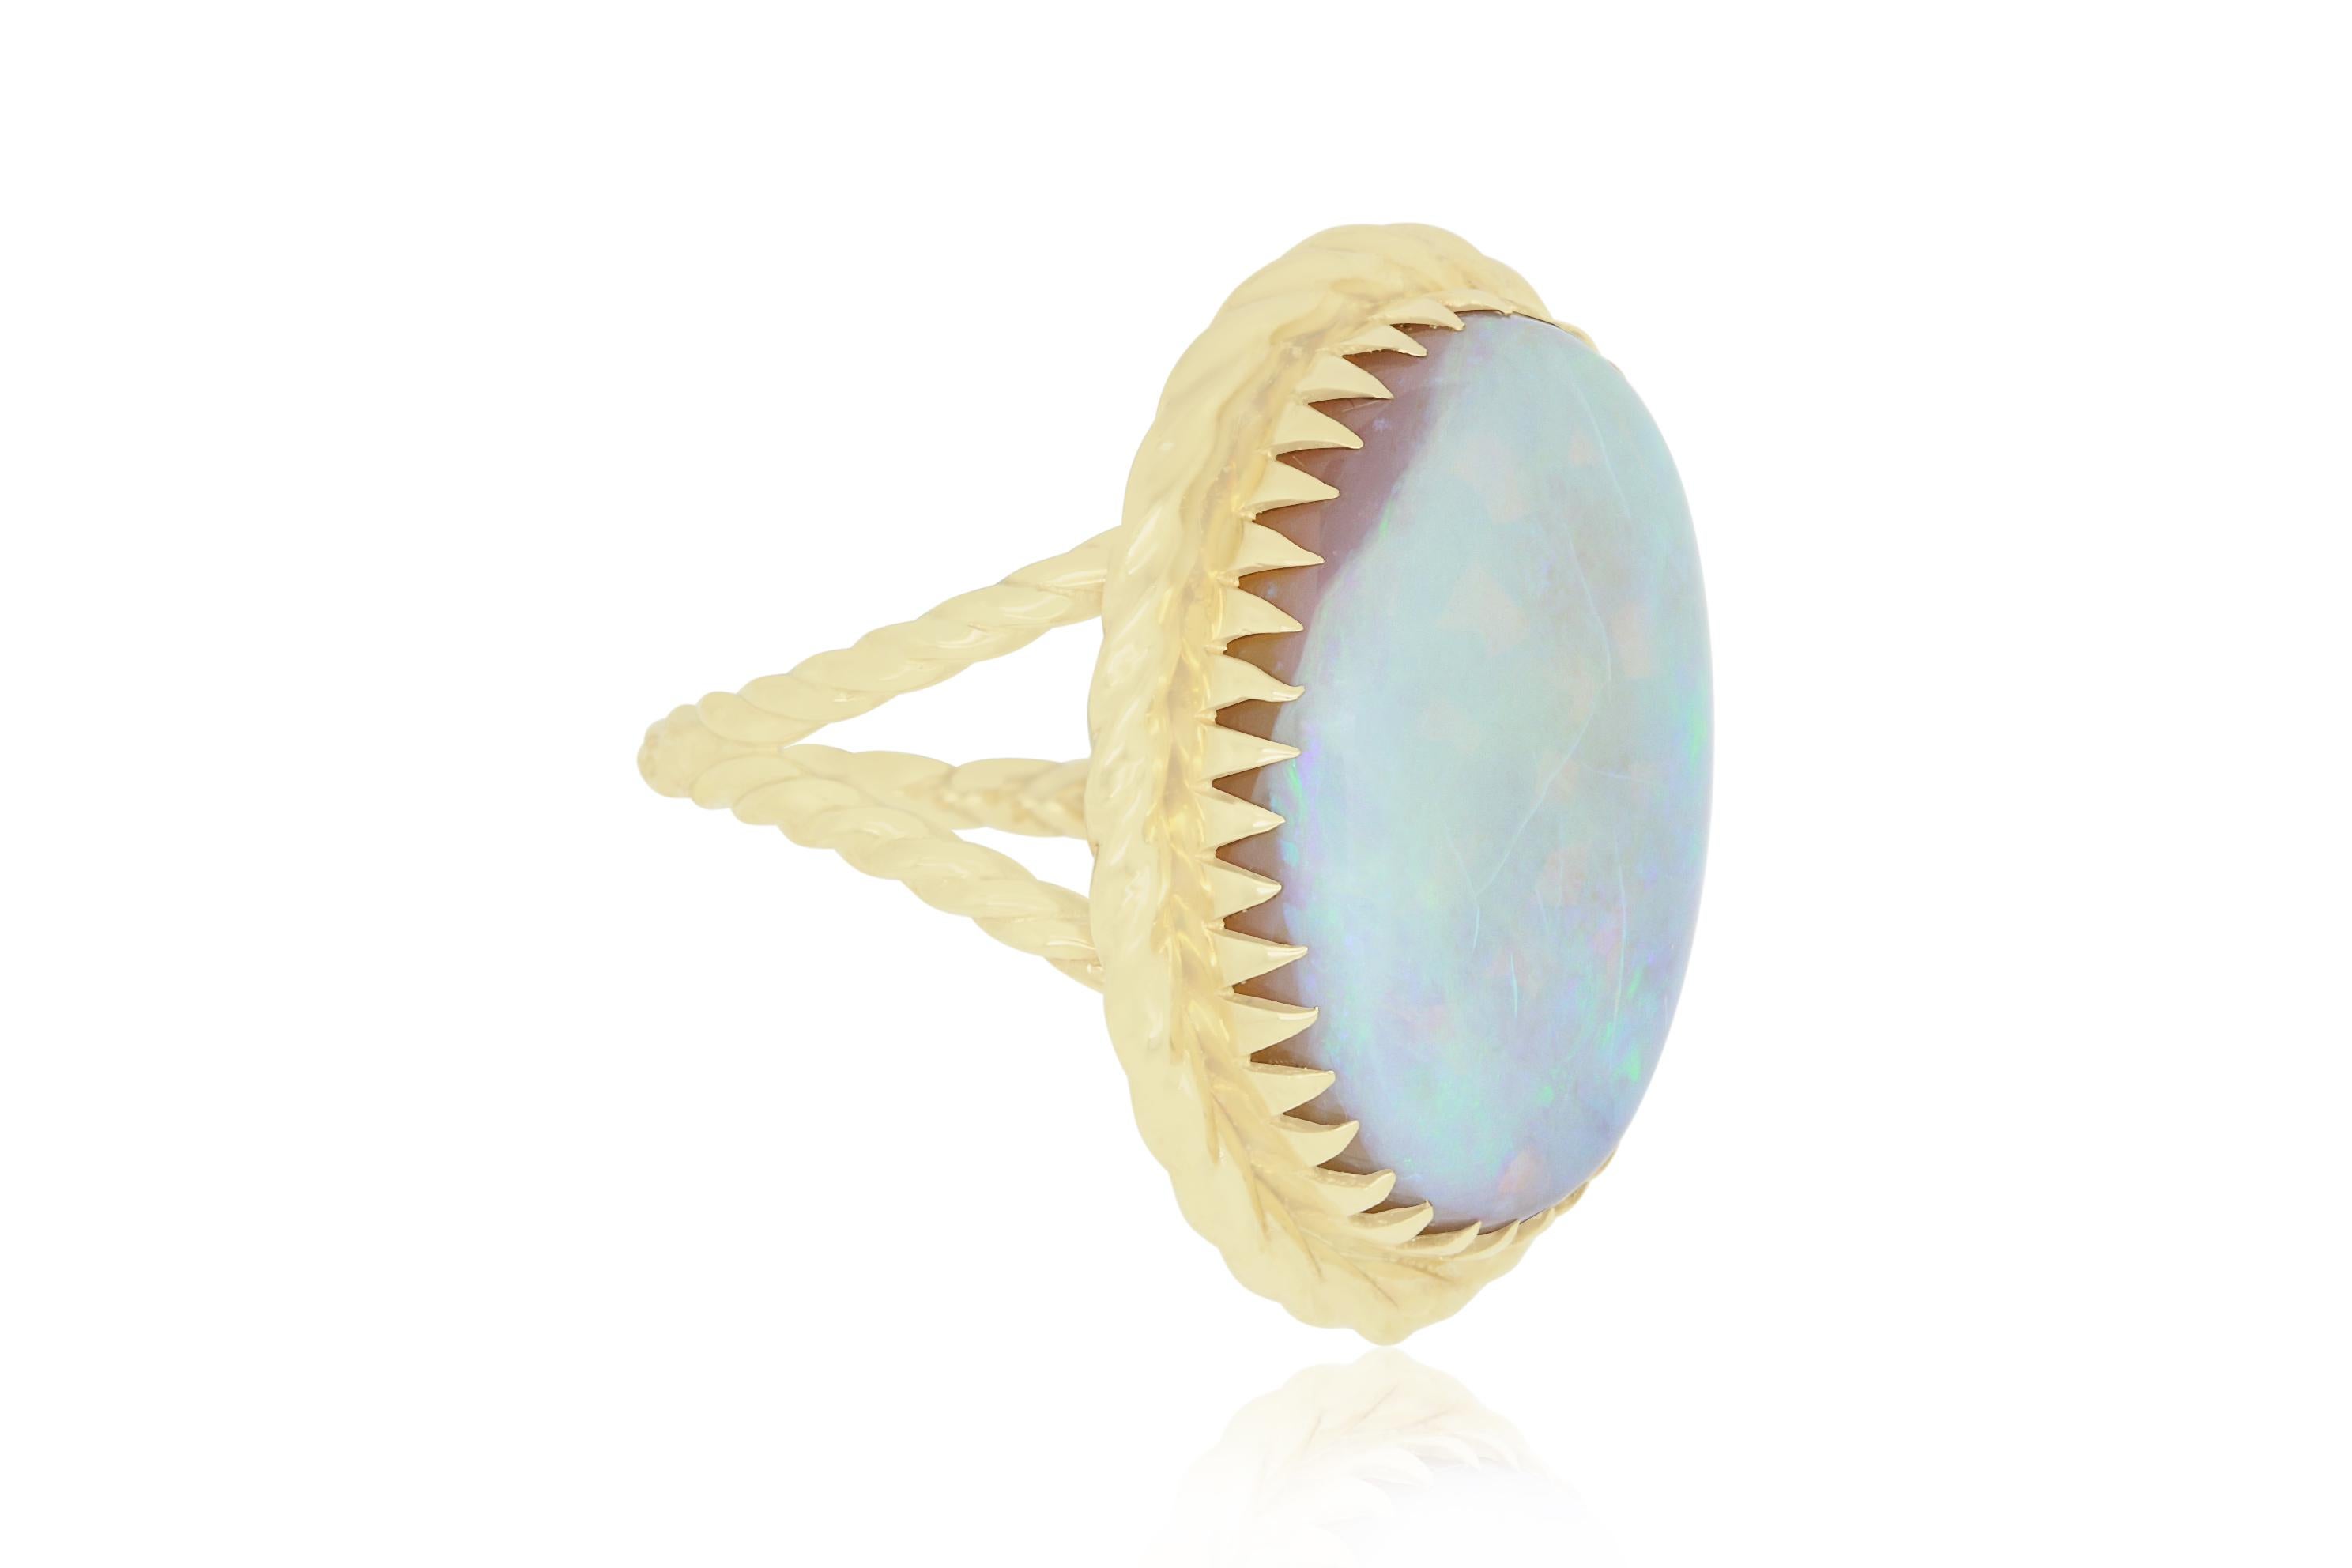 This stunning yet simple 14.10 Carat Oval shaped Opal is braided in 14K Yellow gold. A summer favorite! 

Material: 14k Yellow Gold
Gemstone: 1 Oval Opal at 14.10 Carats.
Ring Size: 6.5 (Can be sized)

Fine one-of-a kind craftsmanship meets